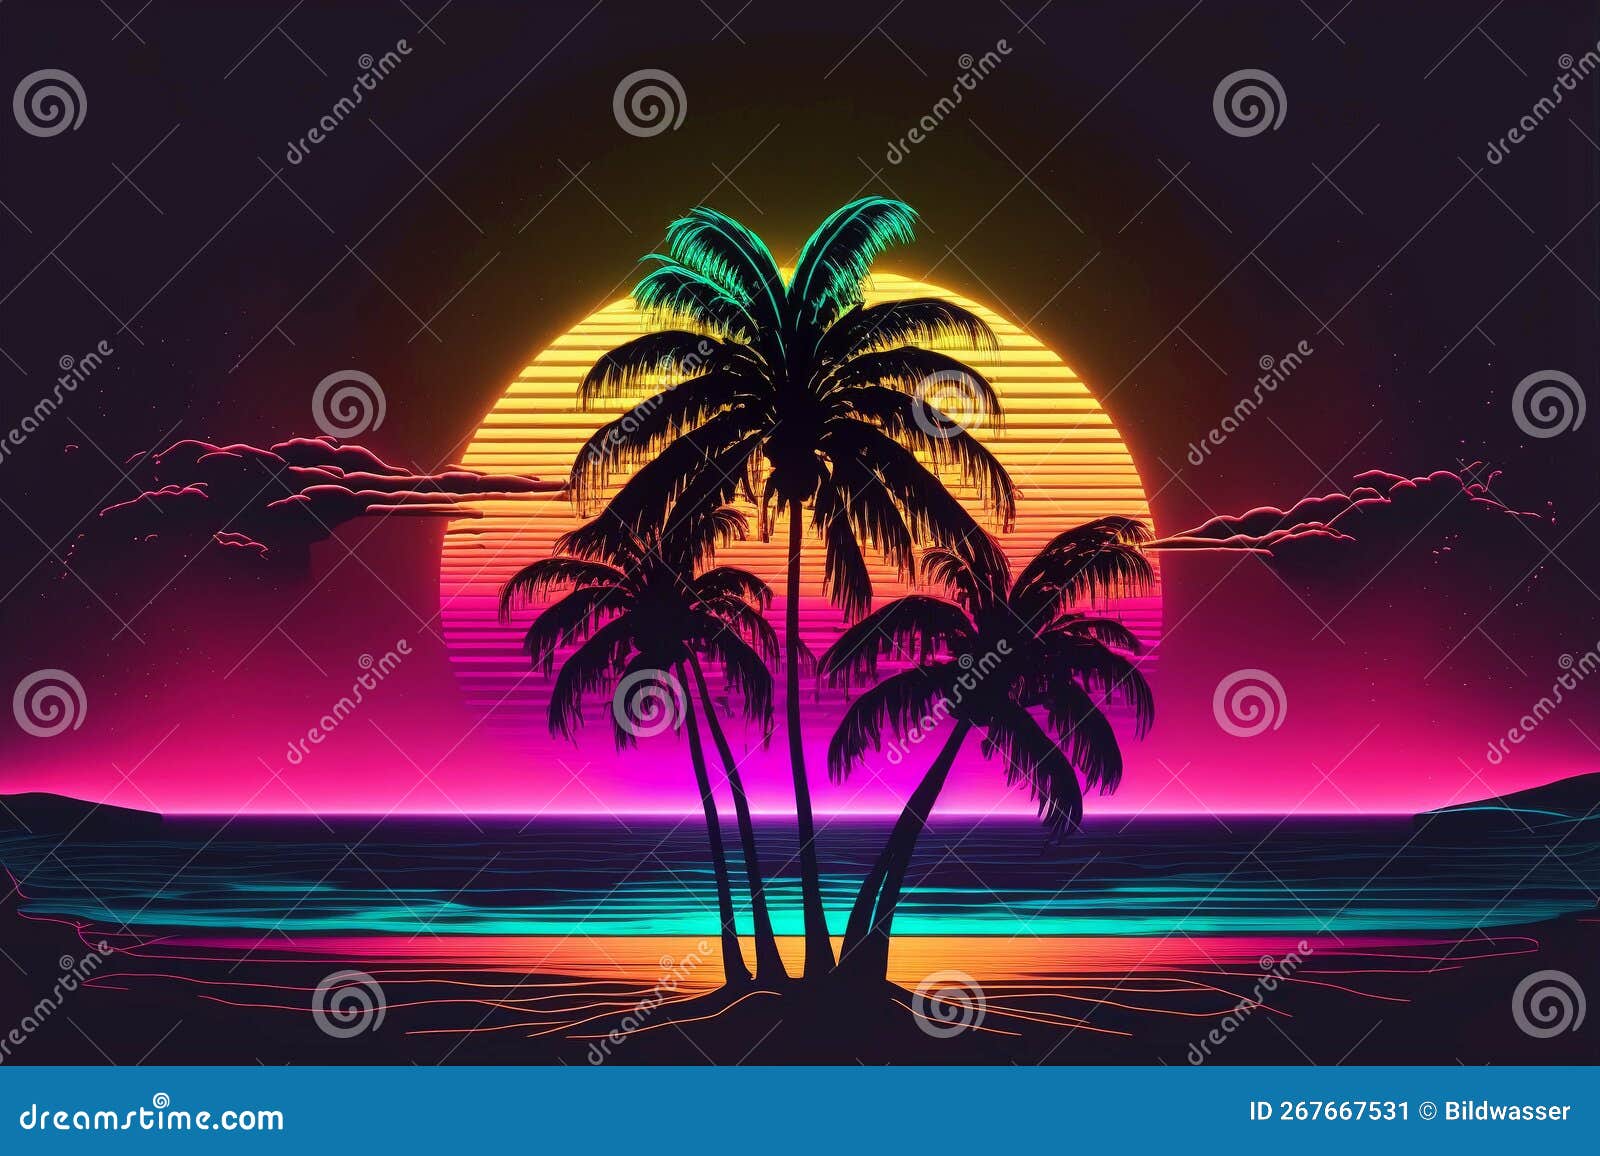 Palms in Sunset with Neon Rays. Neon Palm Tree Sunset Stock ...